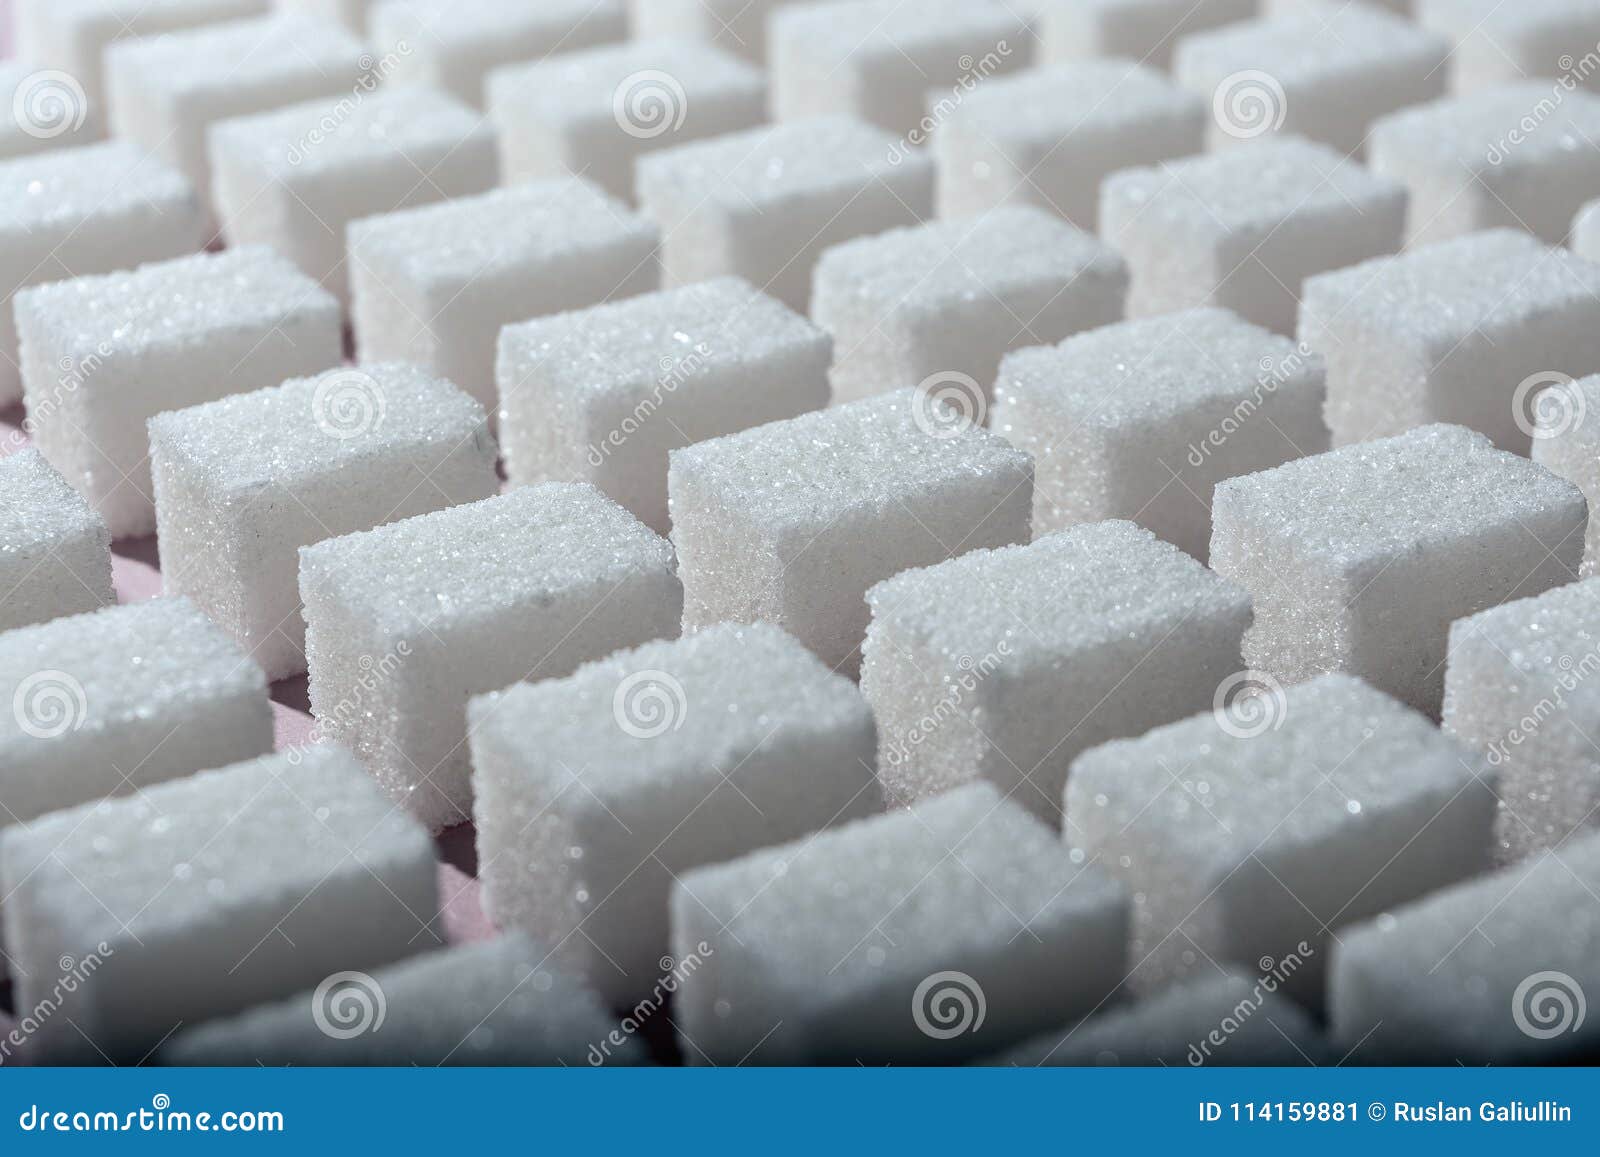 Cubes of Refined White Sugar the Correct Geometric Shape on a Pink ...